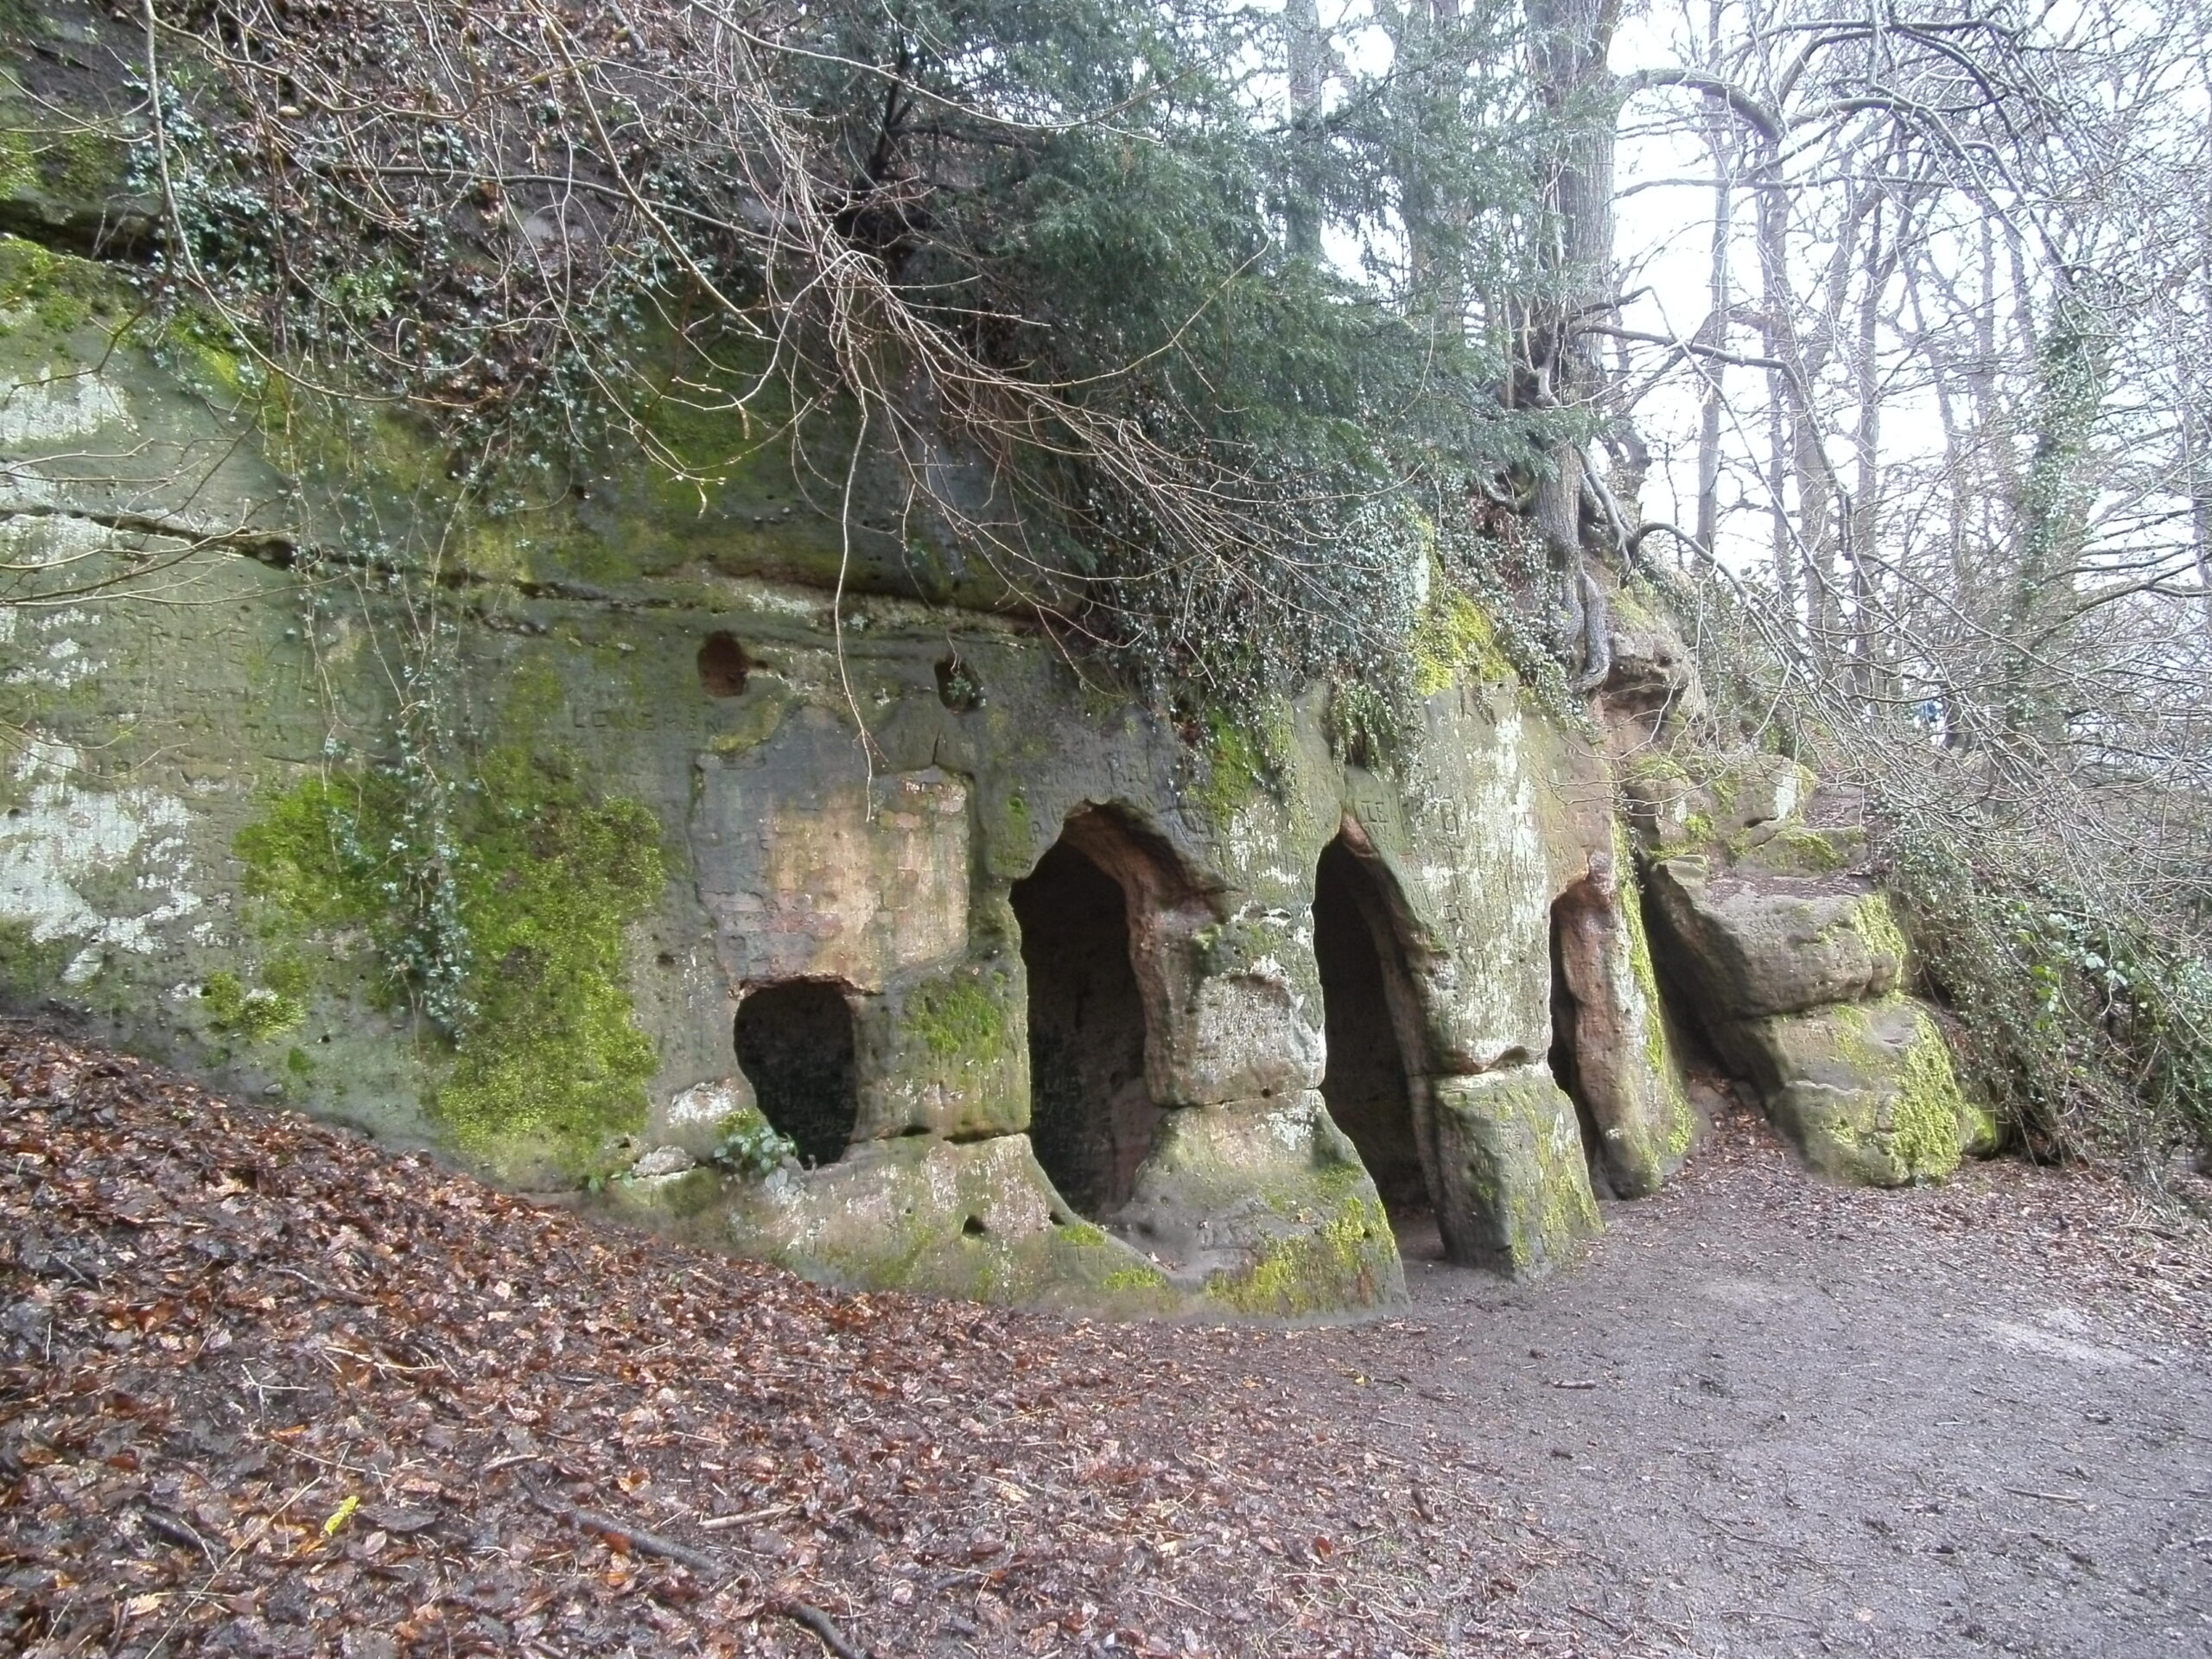 Hermits_Cave_(The_Hermitage),_Hermits_Wood,_Dale_Abbey,_Derbyshire_-_East_Midlands_of_England